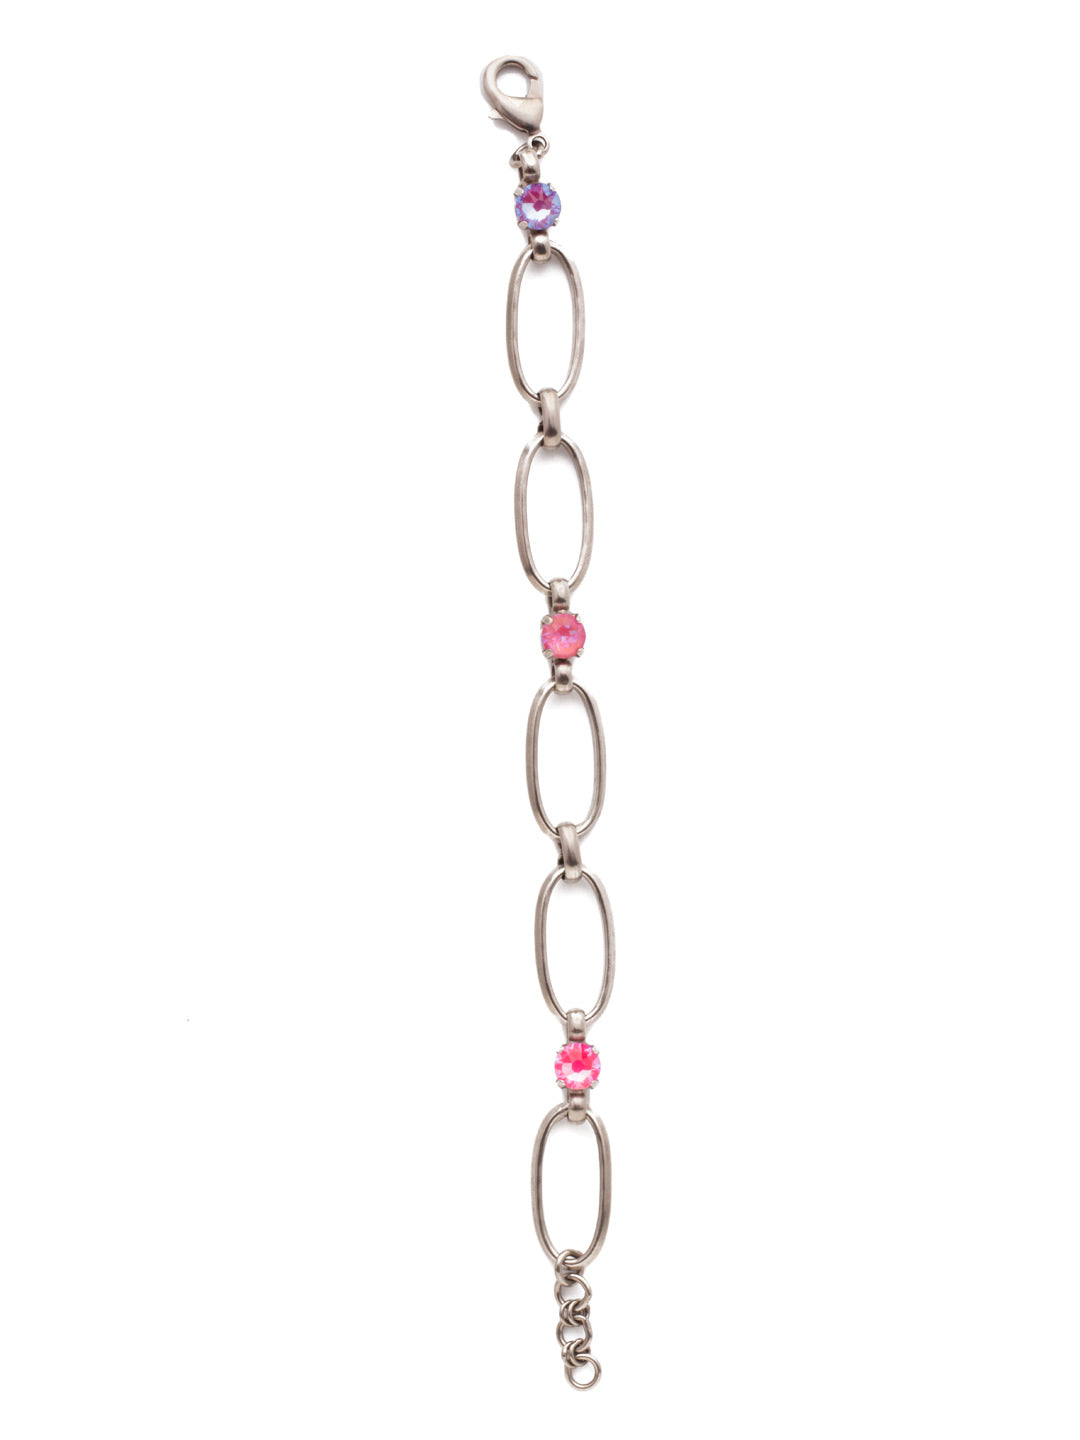 Paige Tennis Bracelet - BET3ASETP - <p>The airy links in this chain bracelet offer big style. Fasten on our Paige Tennis Bracelet, featuring classic design, and accented by sparkling circular crystals. From Sorrelli's Electric Pink collection in our Antique Silver-tone finish.</p>